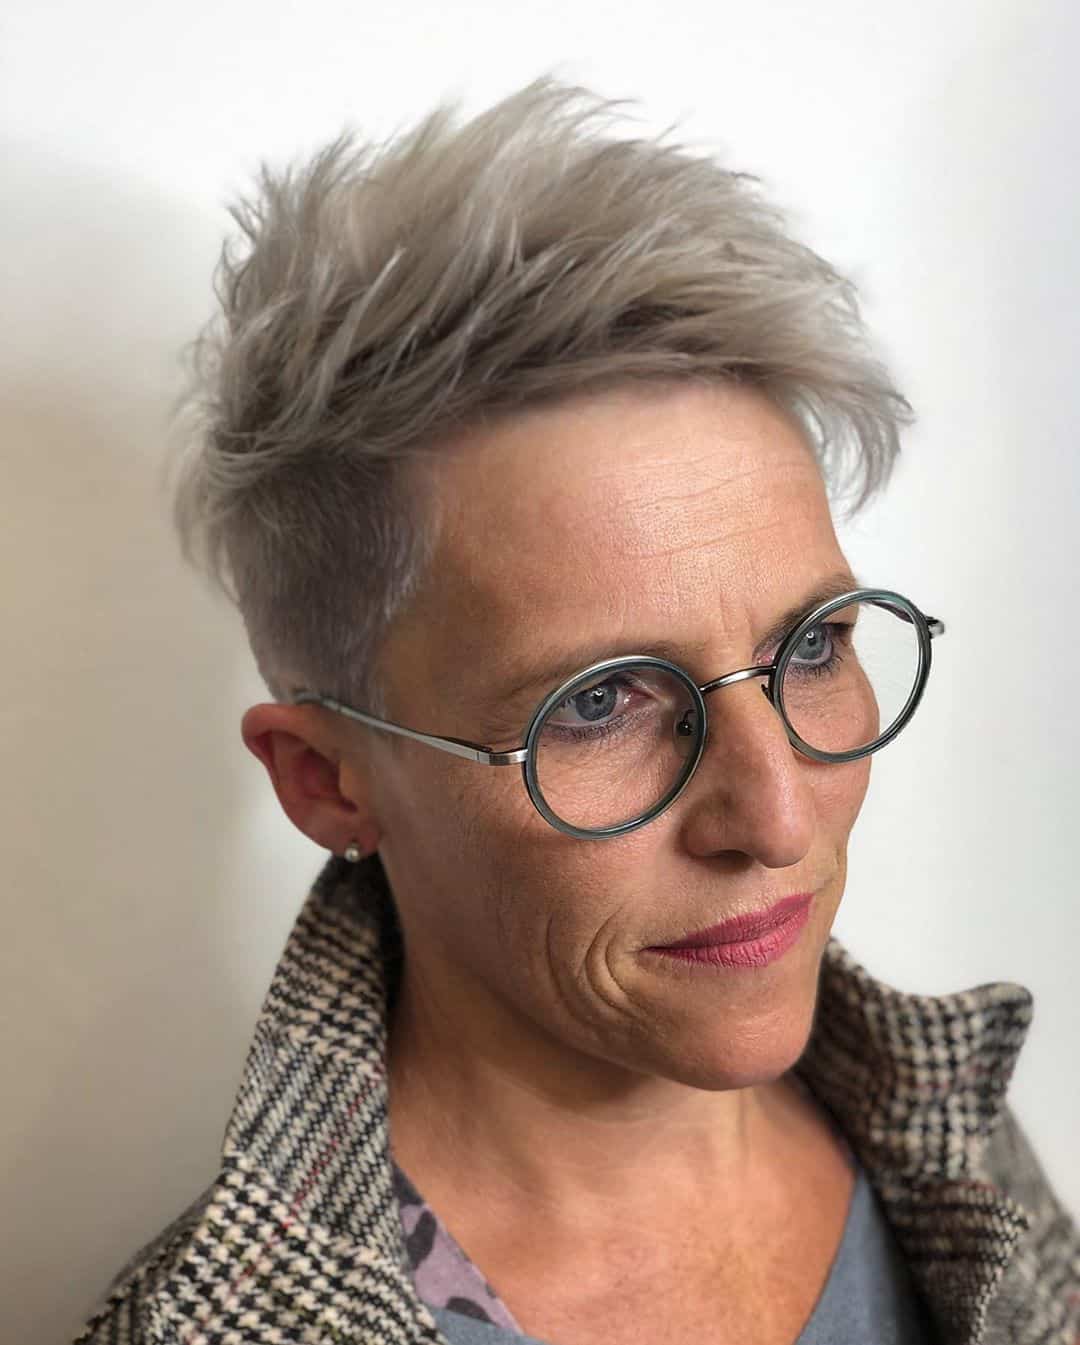 short layered crop cut for women over 60 with glasses